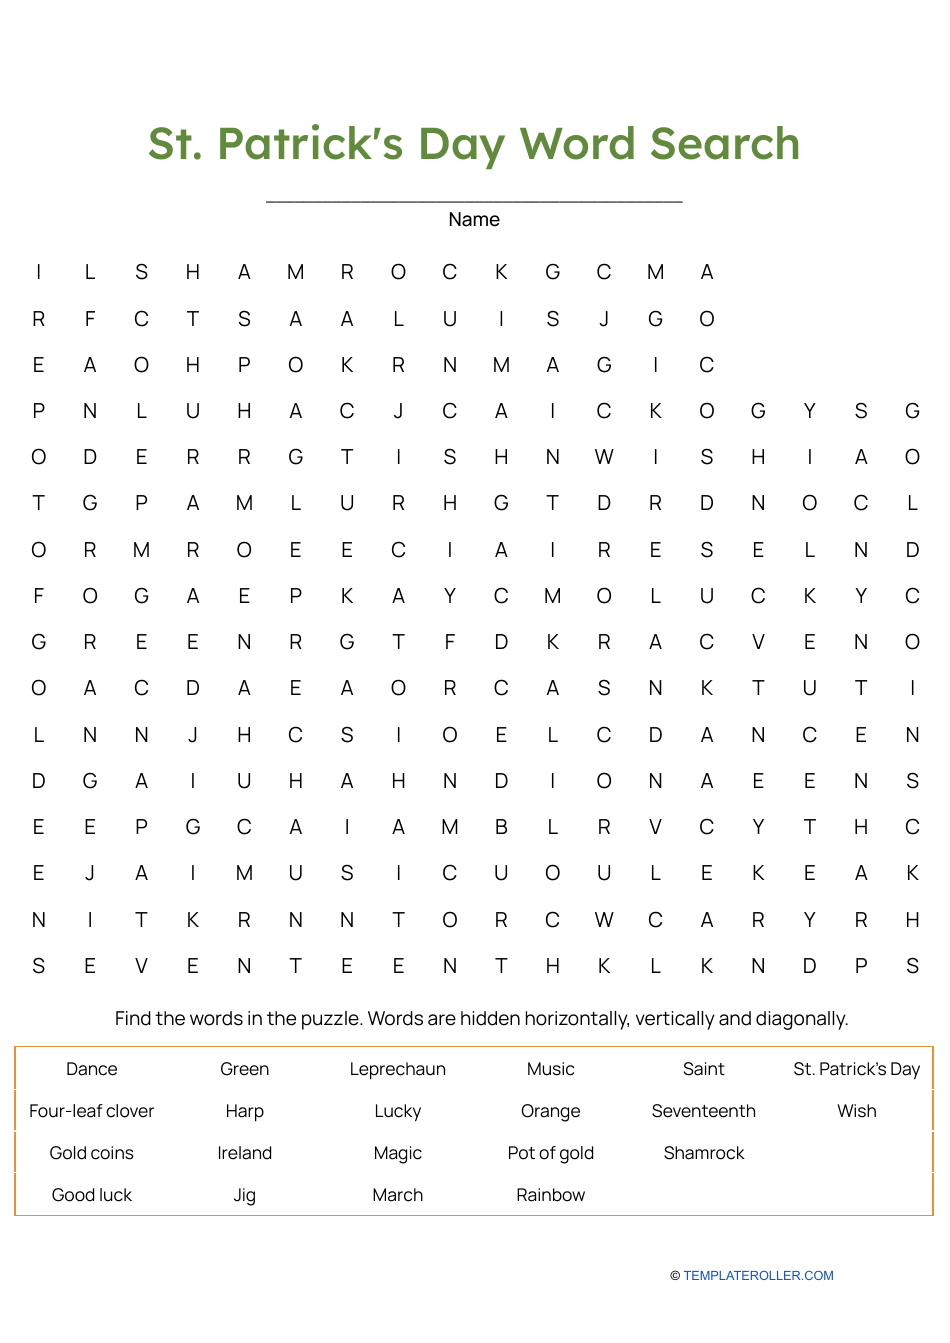 St. Patrick's Day Word Search - Green